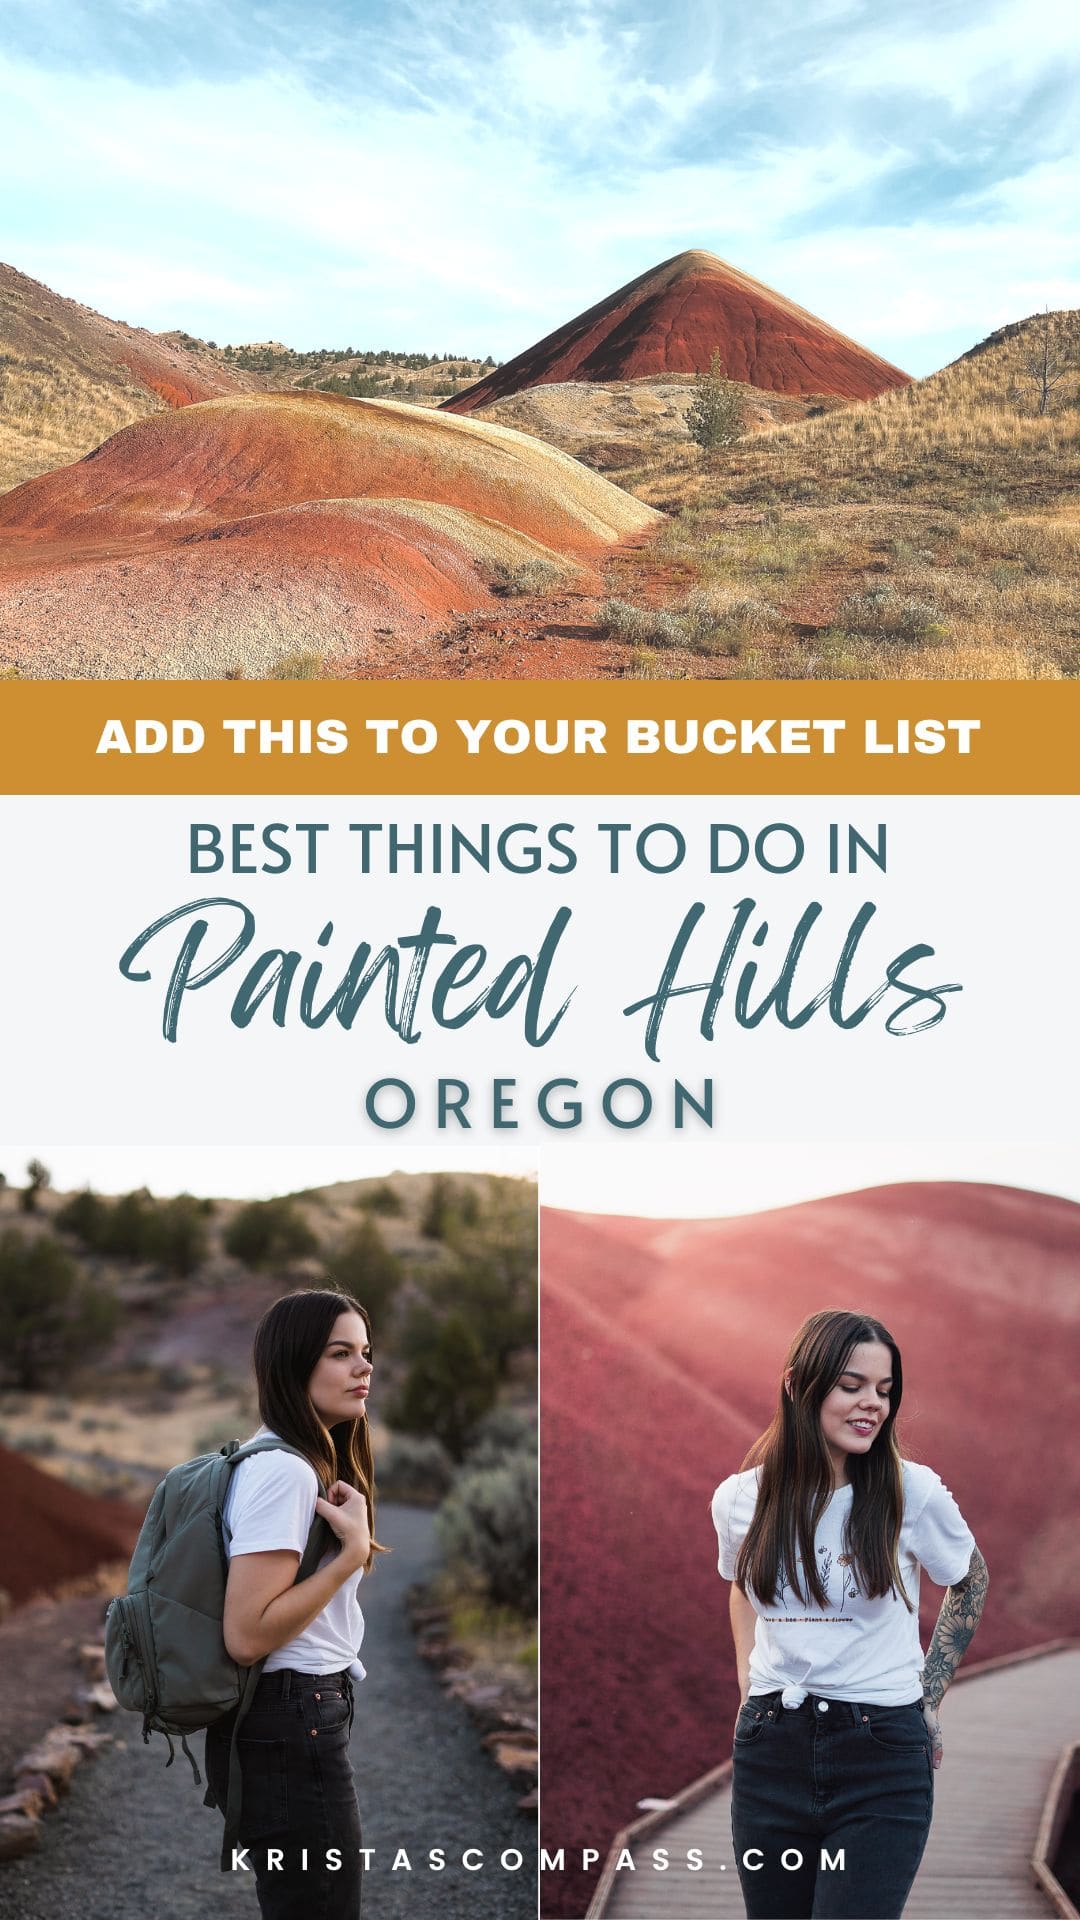 add this oregon destination to your travel bucket list - painted hills oregon